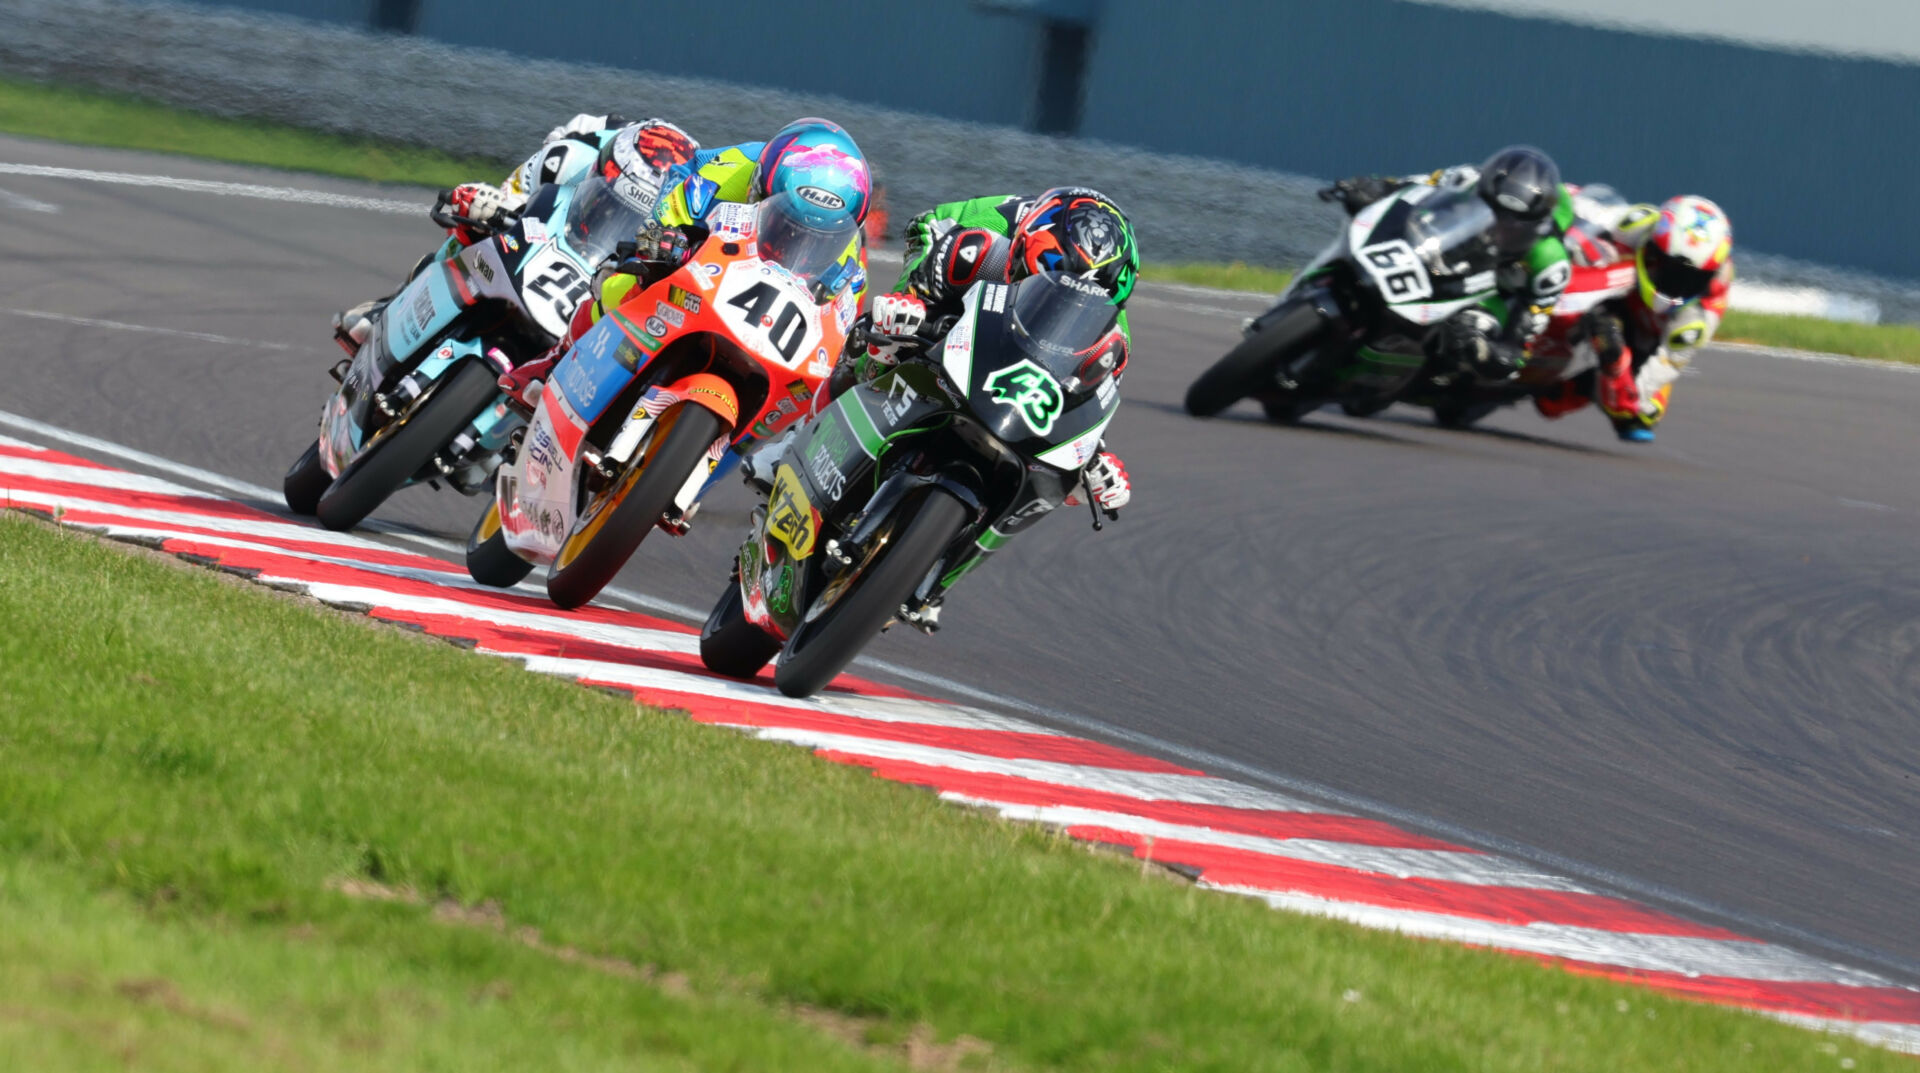 Amanuel Brinton (43) leads Julian Correa (40) and Lucas Brown (29) during British Talent Cup Race One at Donington Park. They finished the race in this order with just 0.3 second separating them. Photo courtesy Dorna.